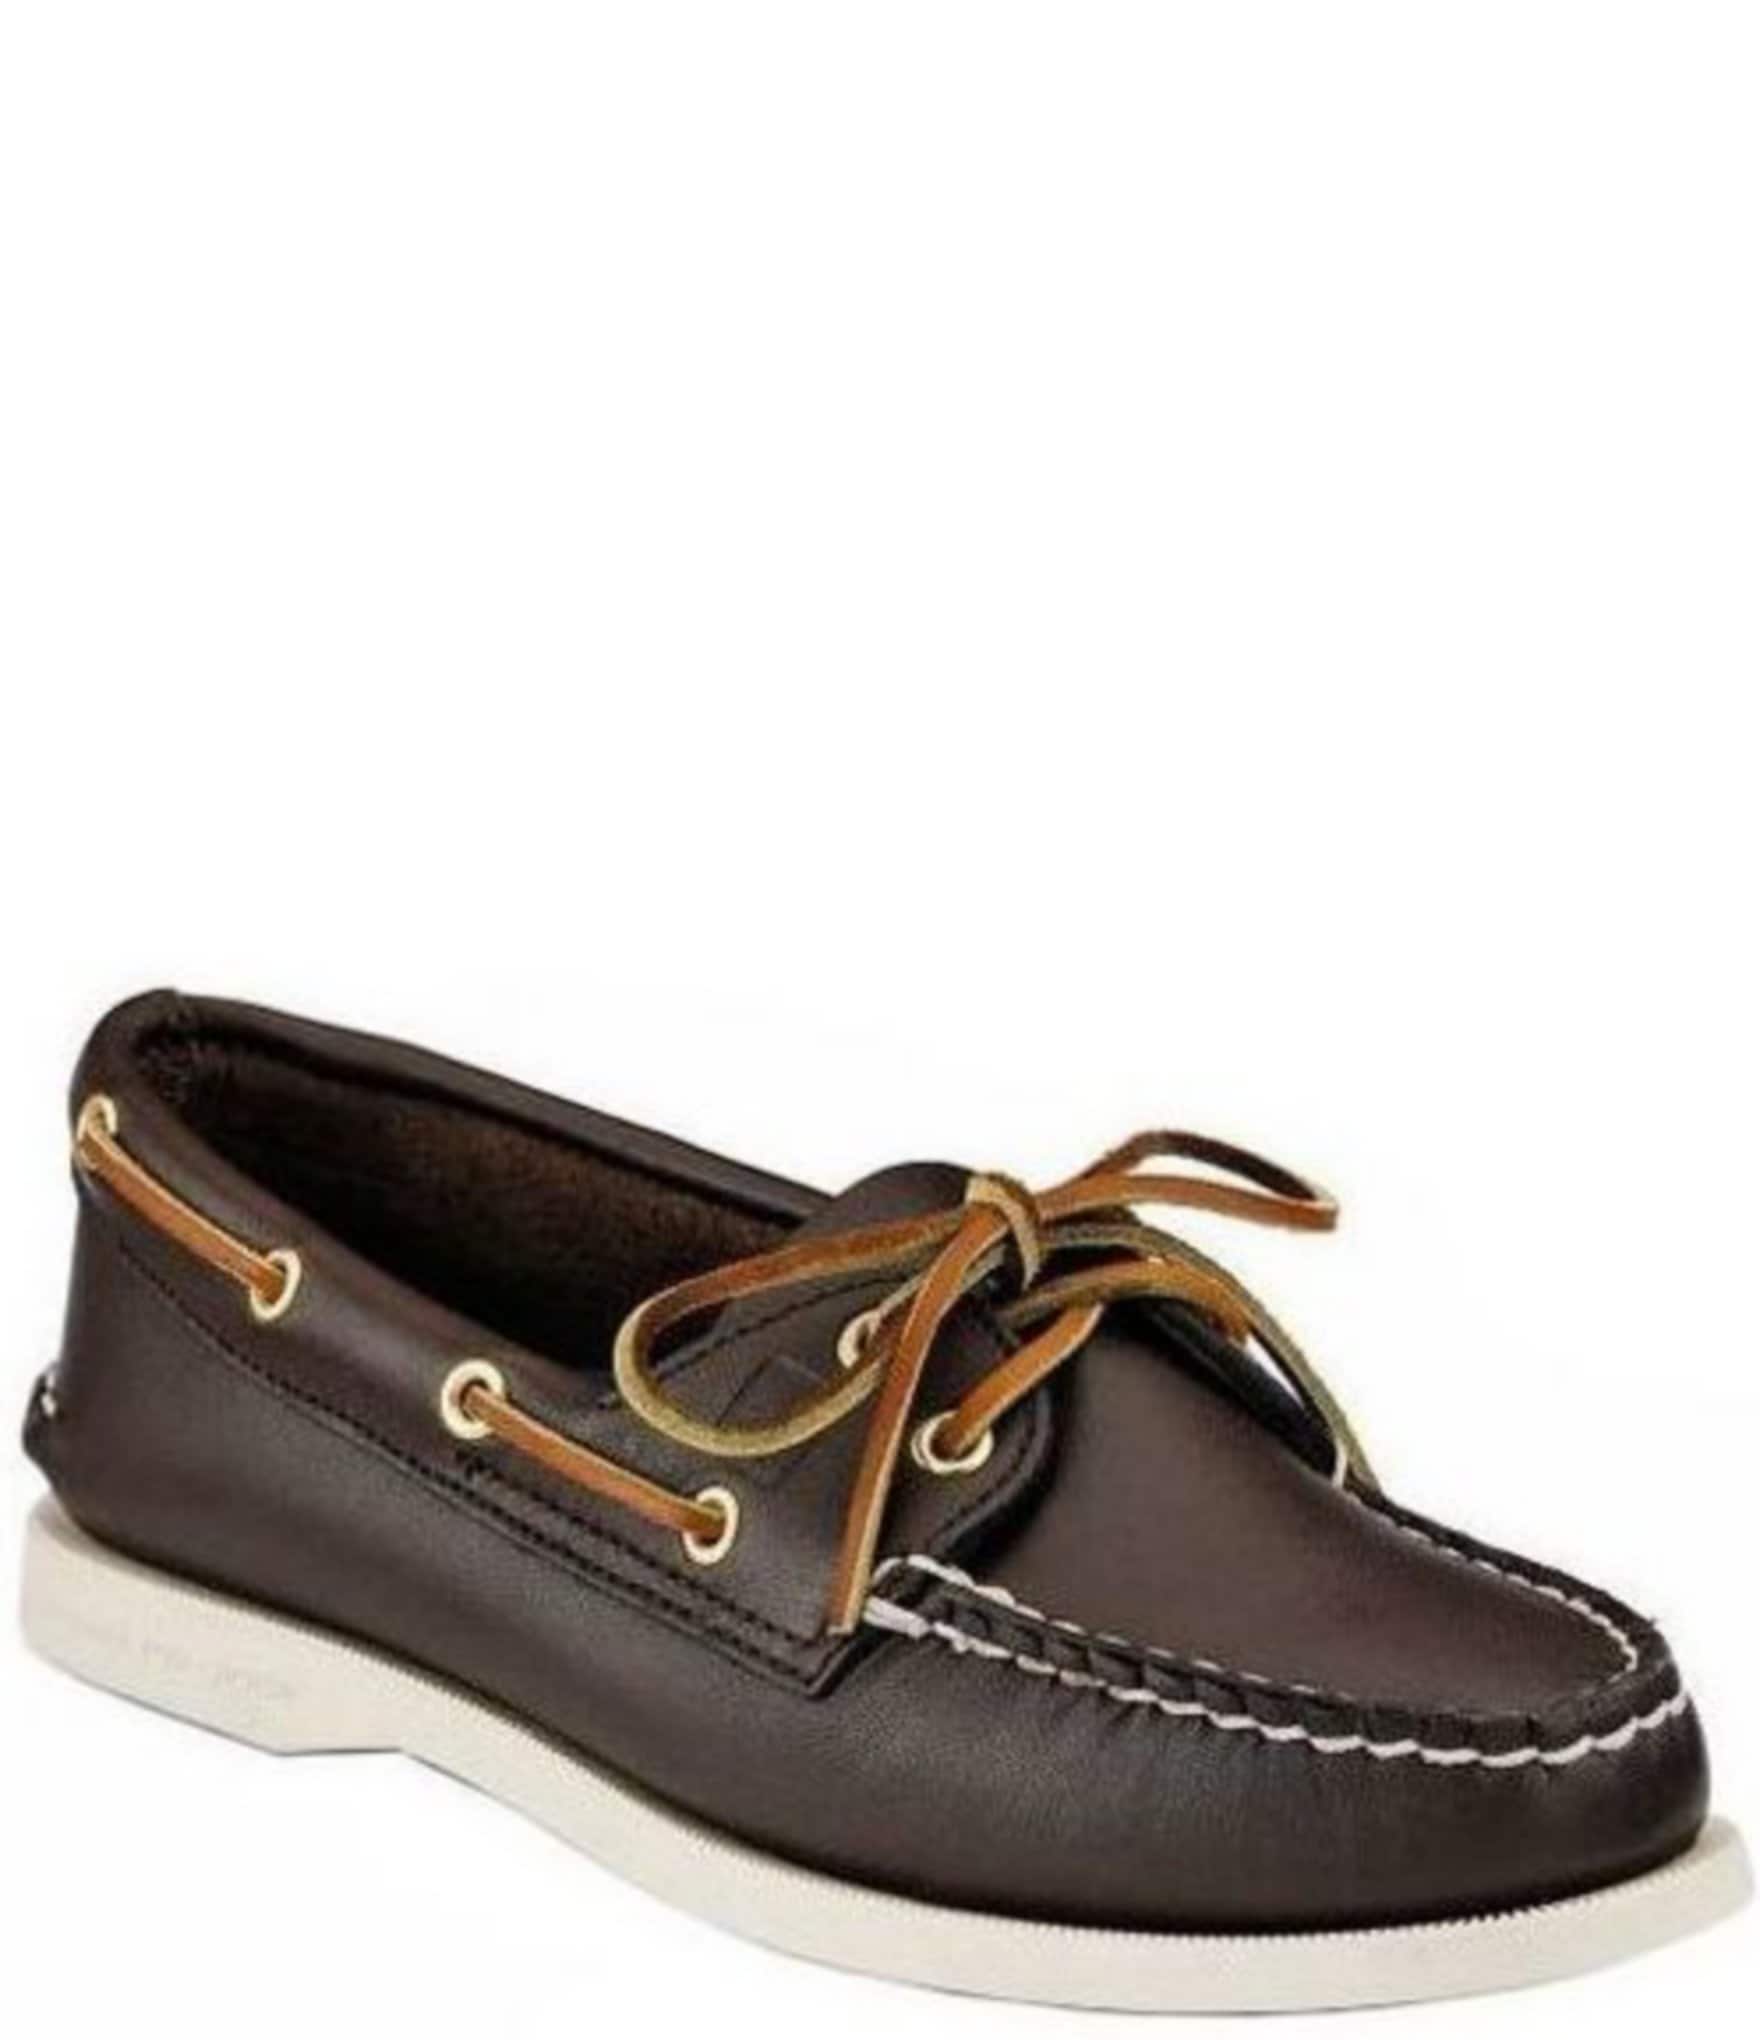 women's boat shoes with arch support